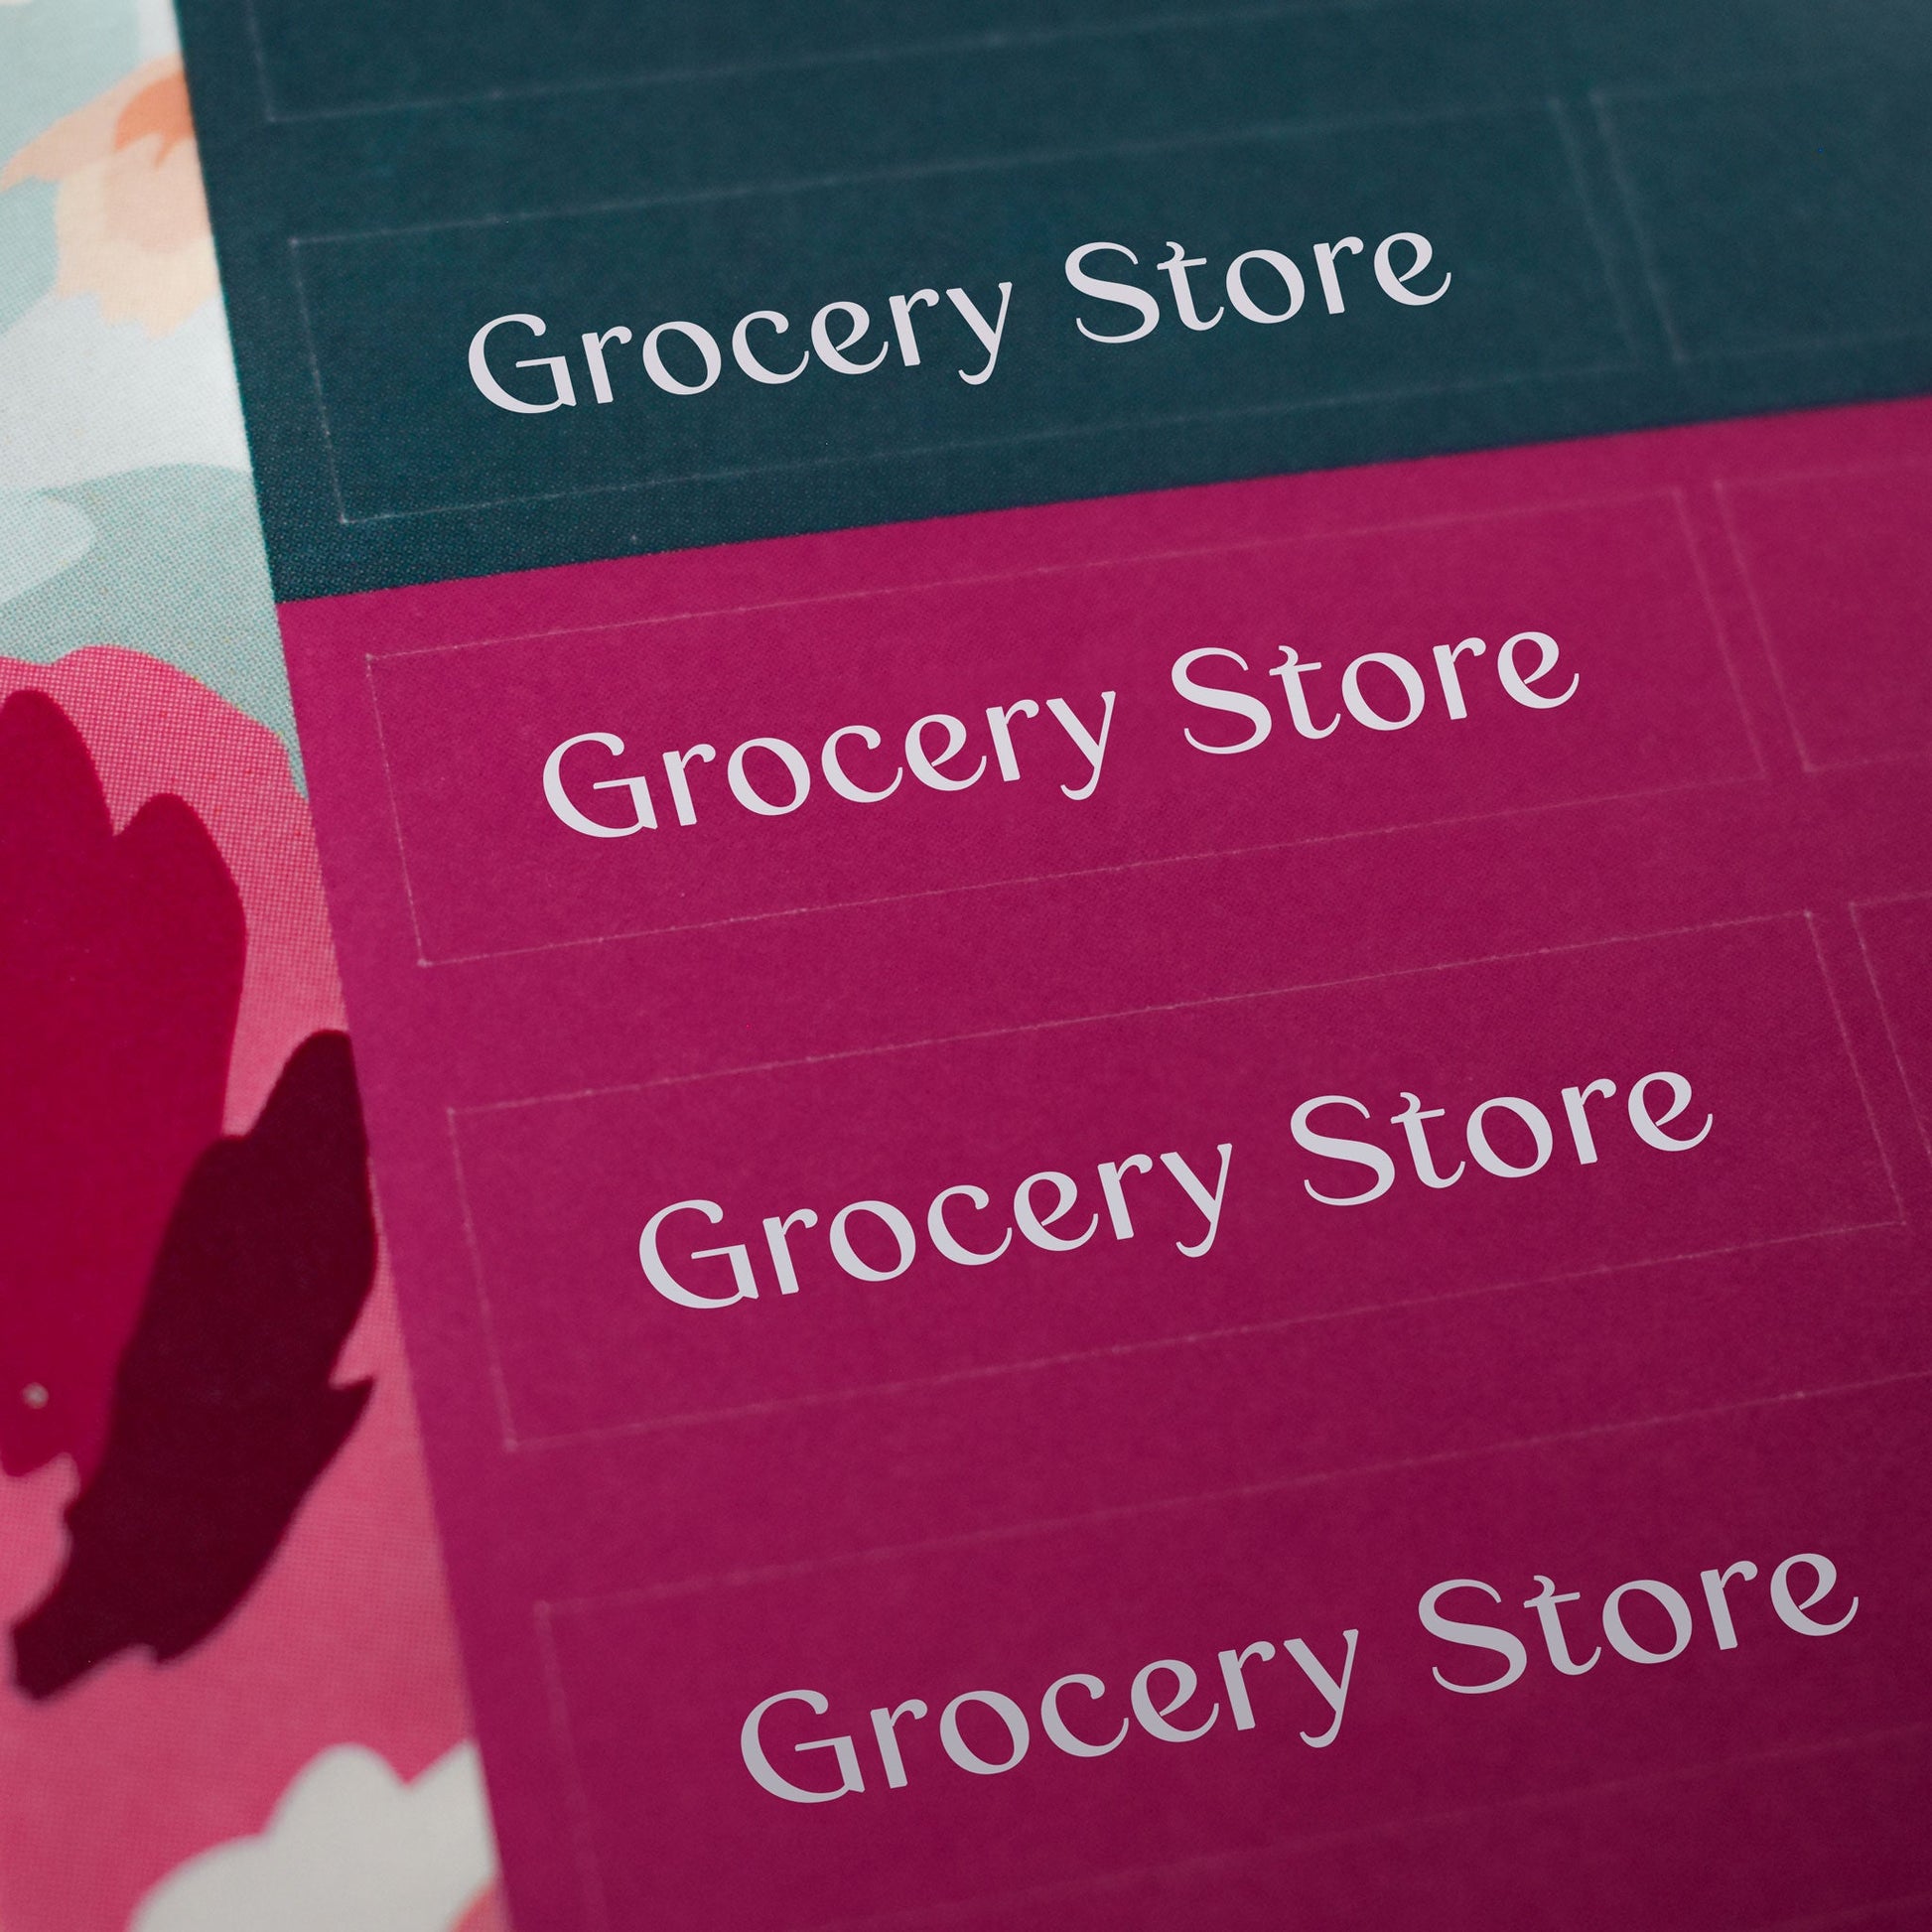 Grocery Store Sticker Sheets - "Grocery Store" (2 Sheets) - Colibri Paper Co